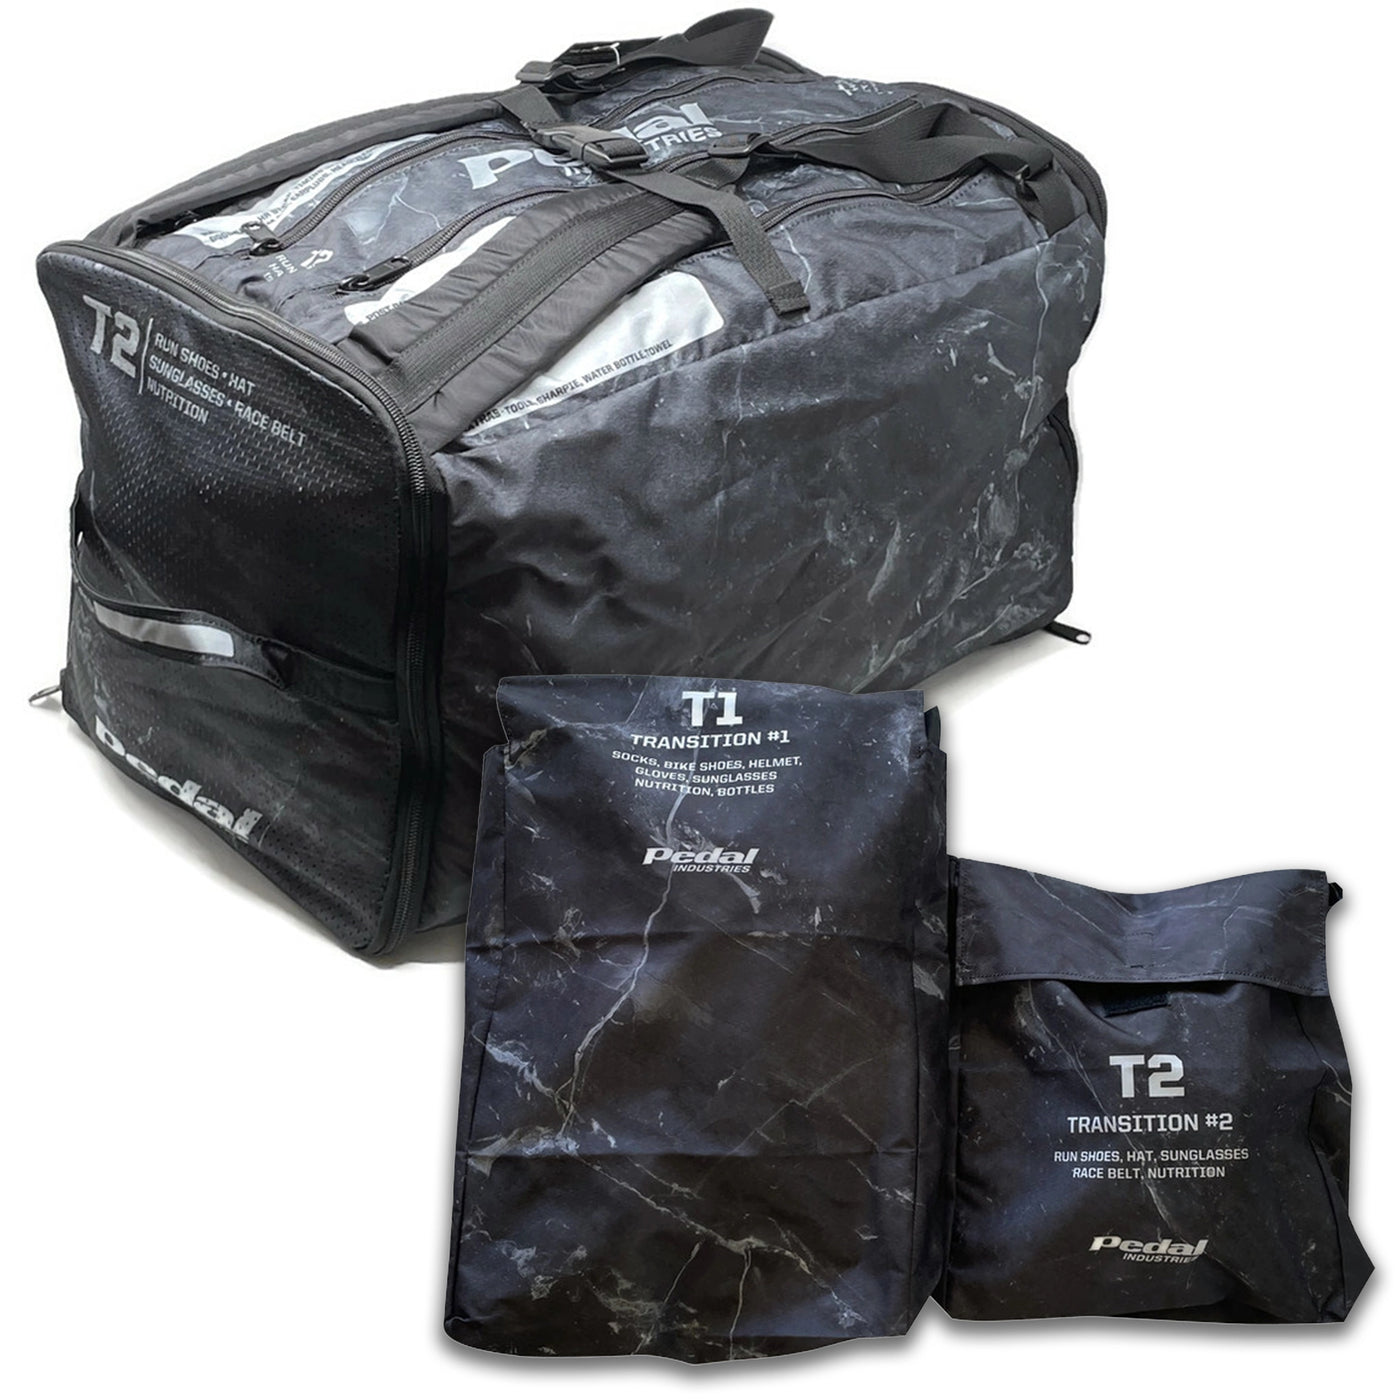 All Marble TRIATHLON PRO RaceDay Bag™ - 6 different colors ISD